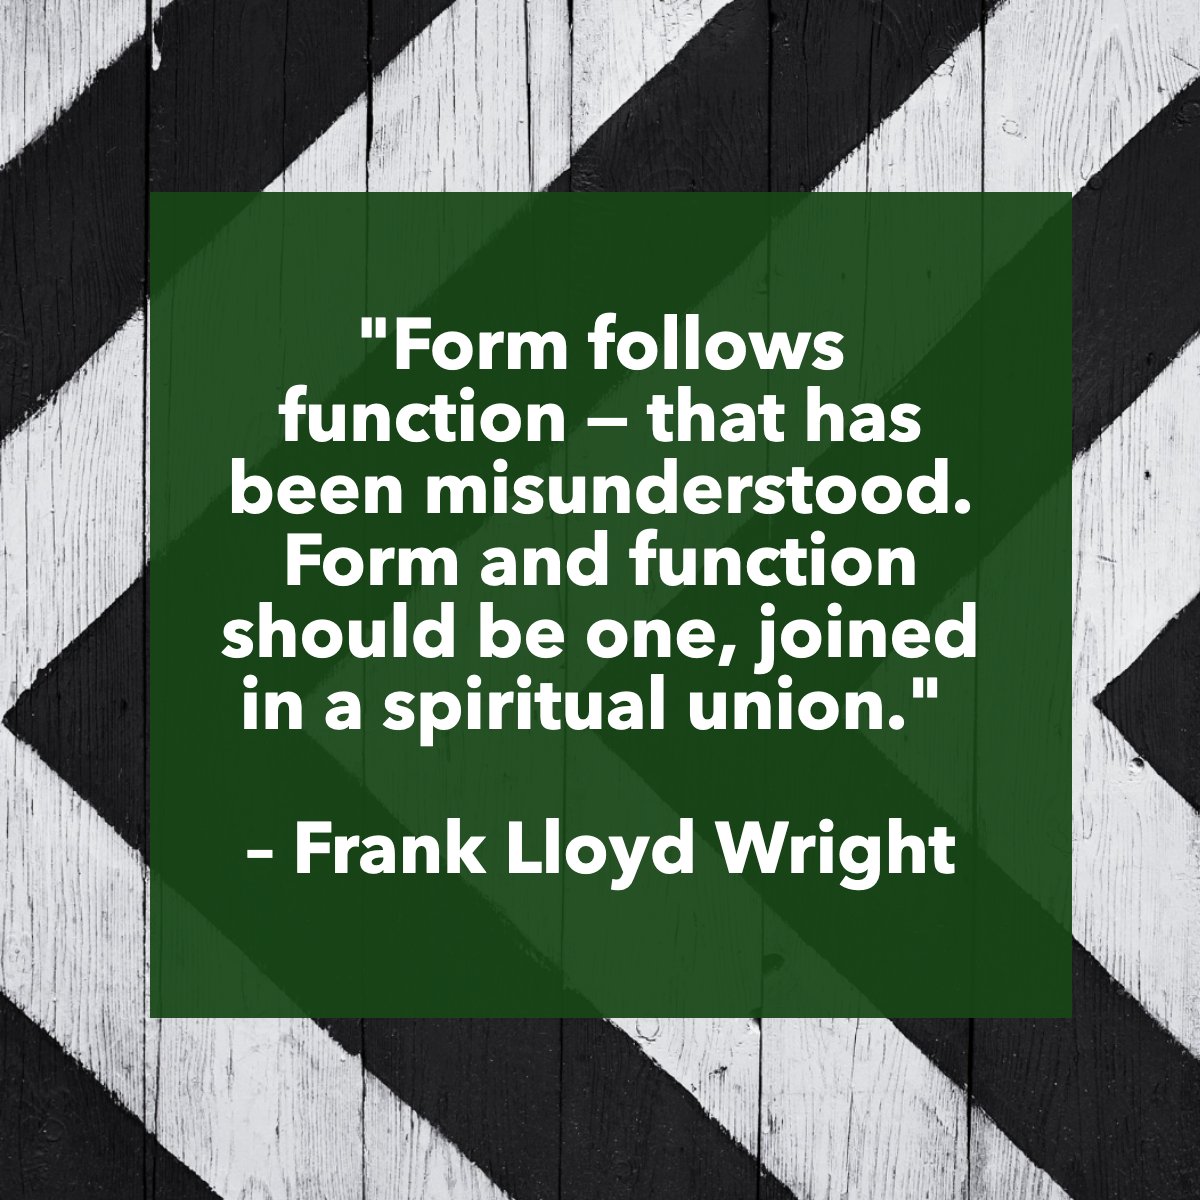 'Form follows function—that has been misunderstood. Form and function should be one, joined in a spiritual union.'
― Frank Lloyd Wright 

#pamcorningrealtor #plymouthcountyliving #seniorsrealestatespecialist #55PlusLiving #homesmartfirstclassrealty #babyboomer